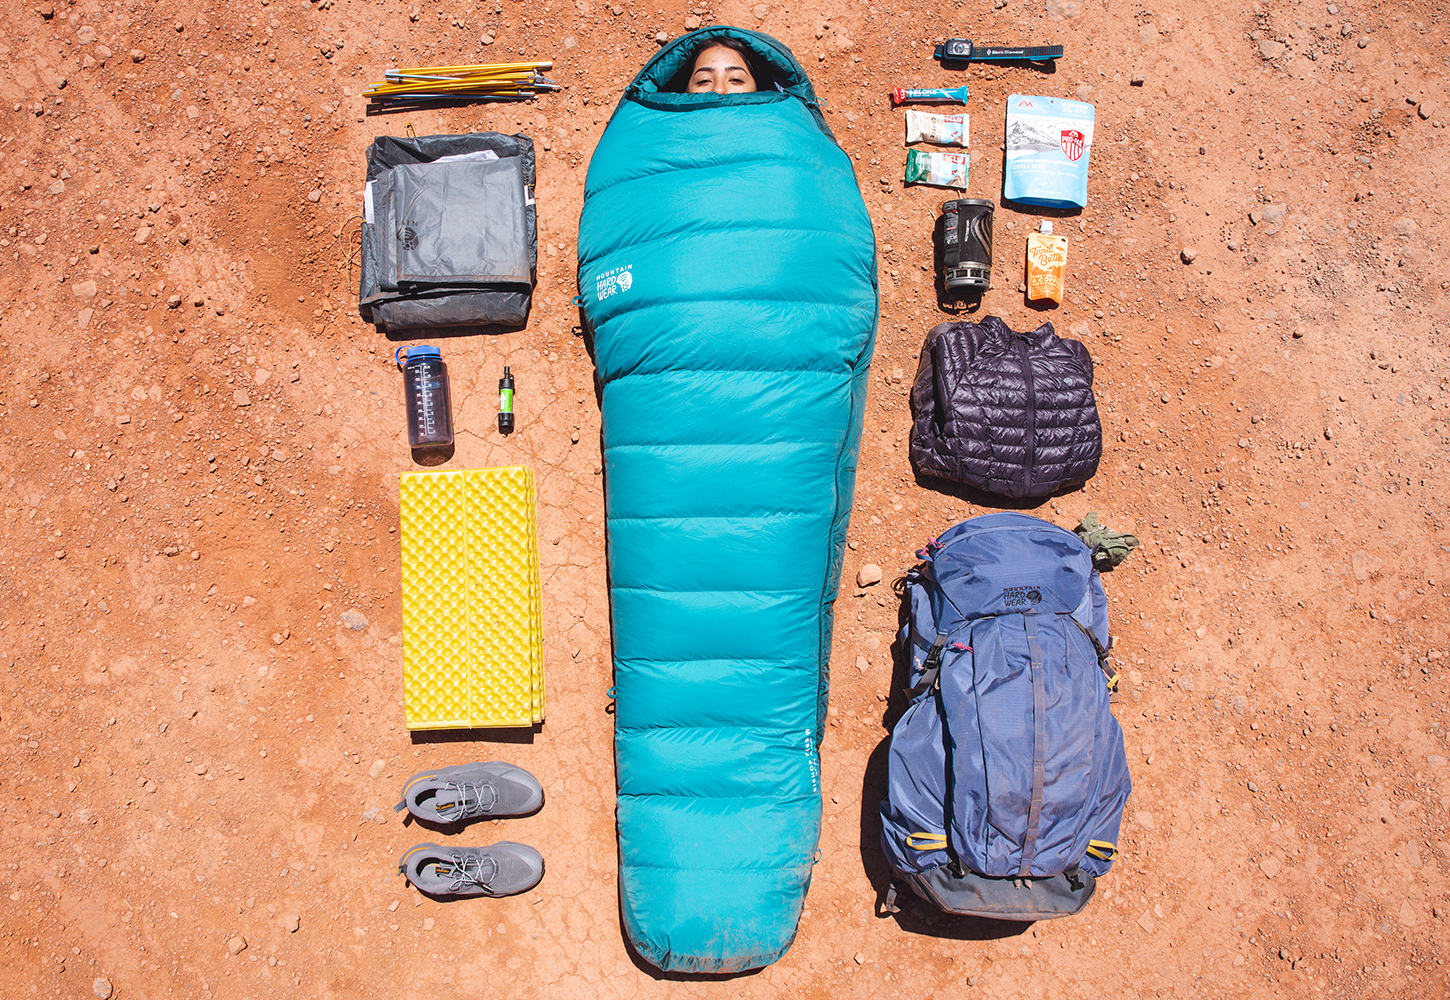 Laydown shot of a backpacker fully cozied up in her sleeping bag